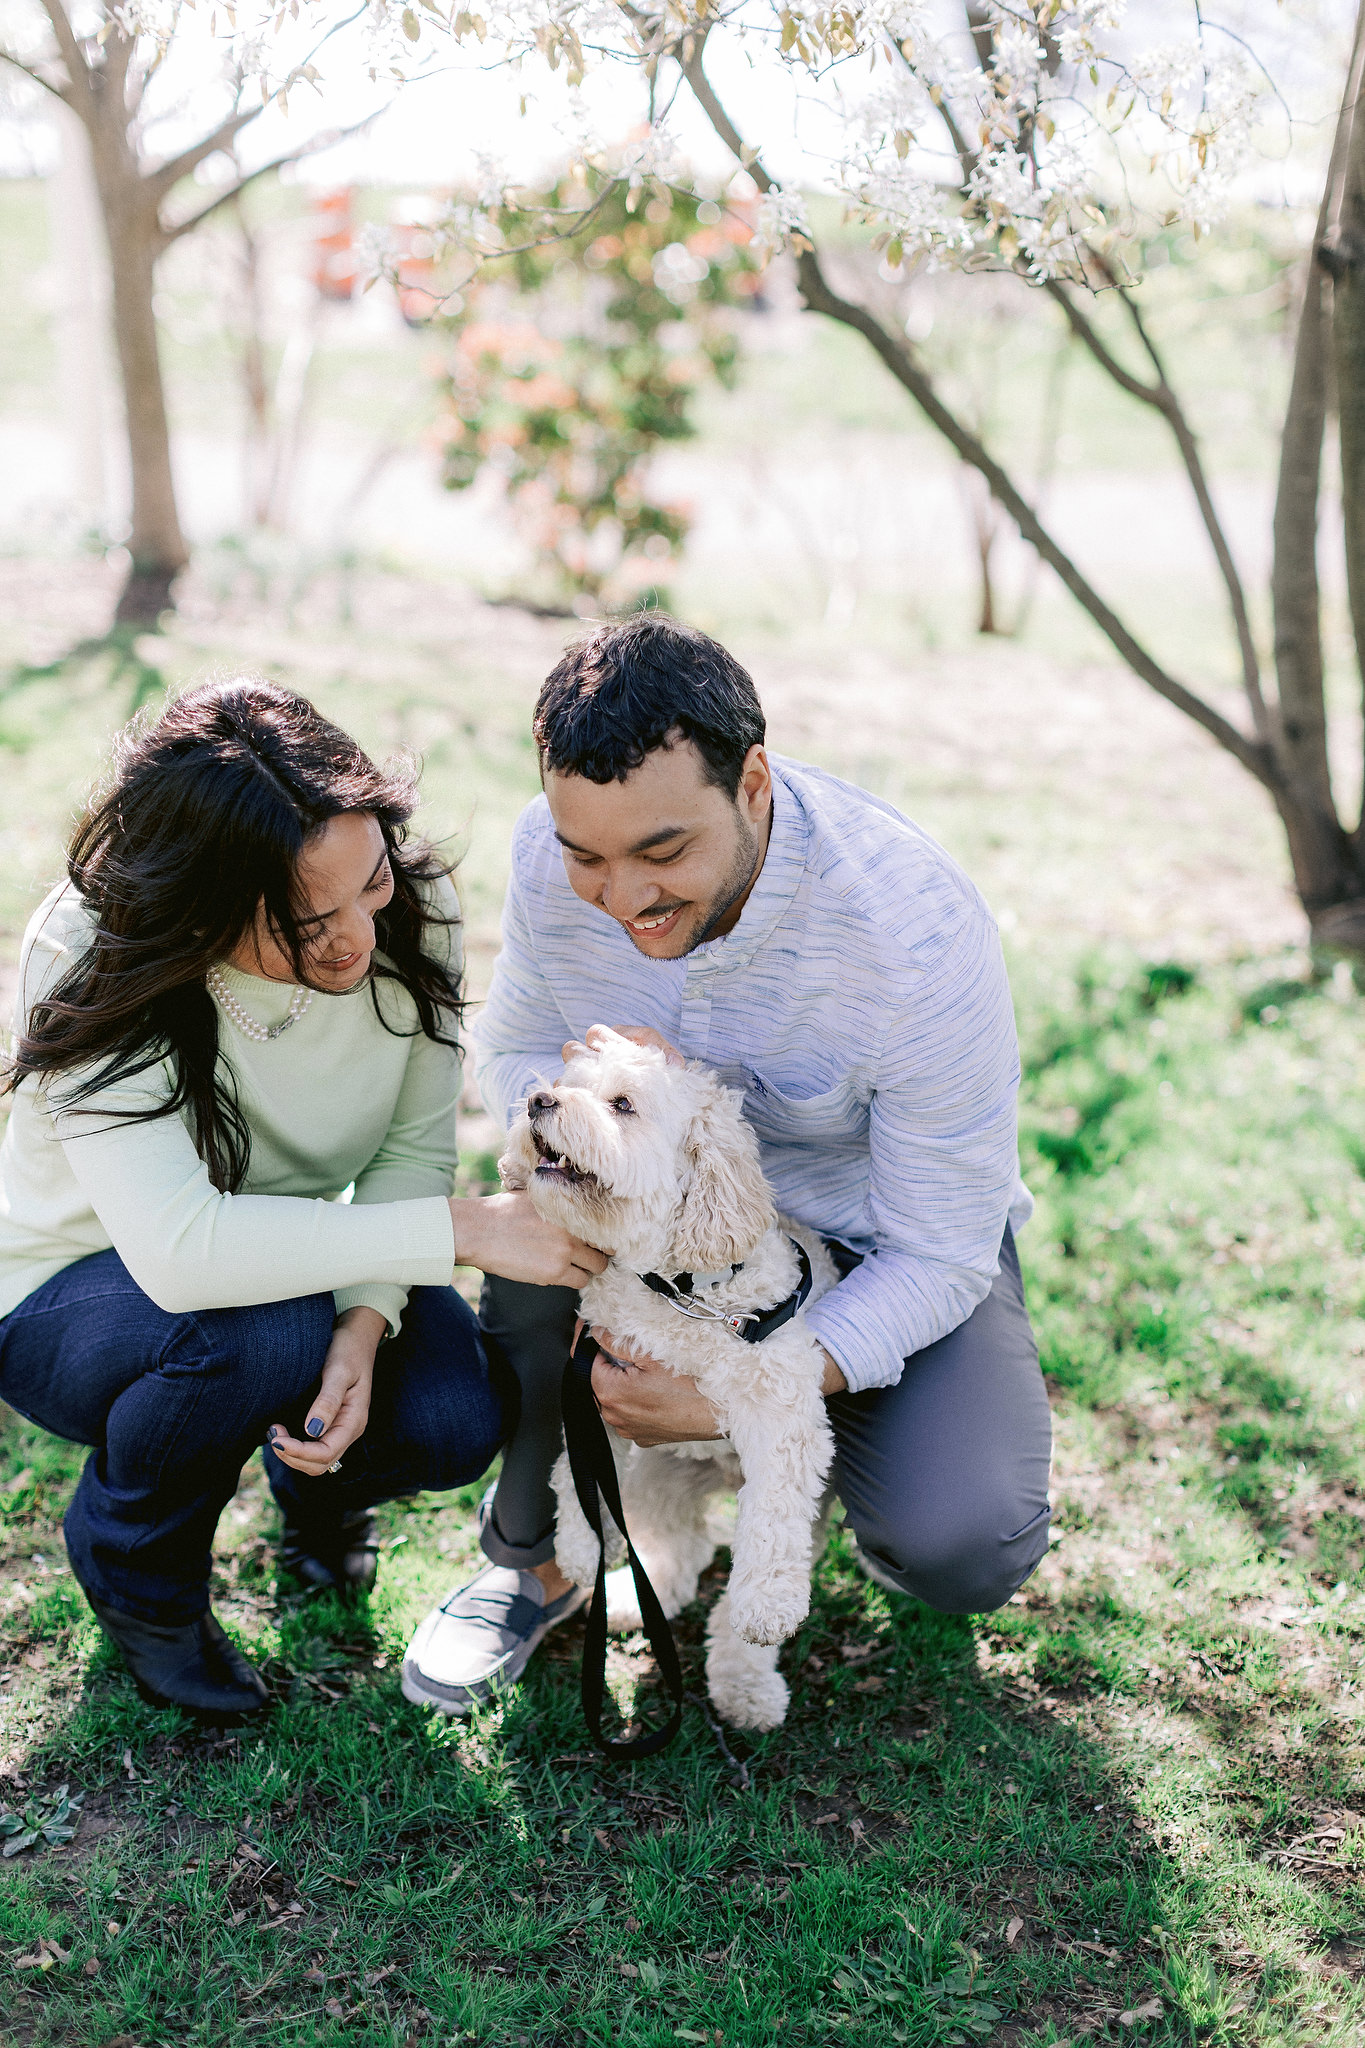 The engaged couple is cuddling their dog in a Park in NY. Editorial image by Jenny Fu Studio